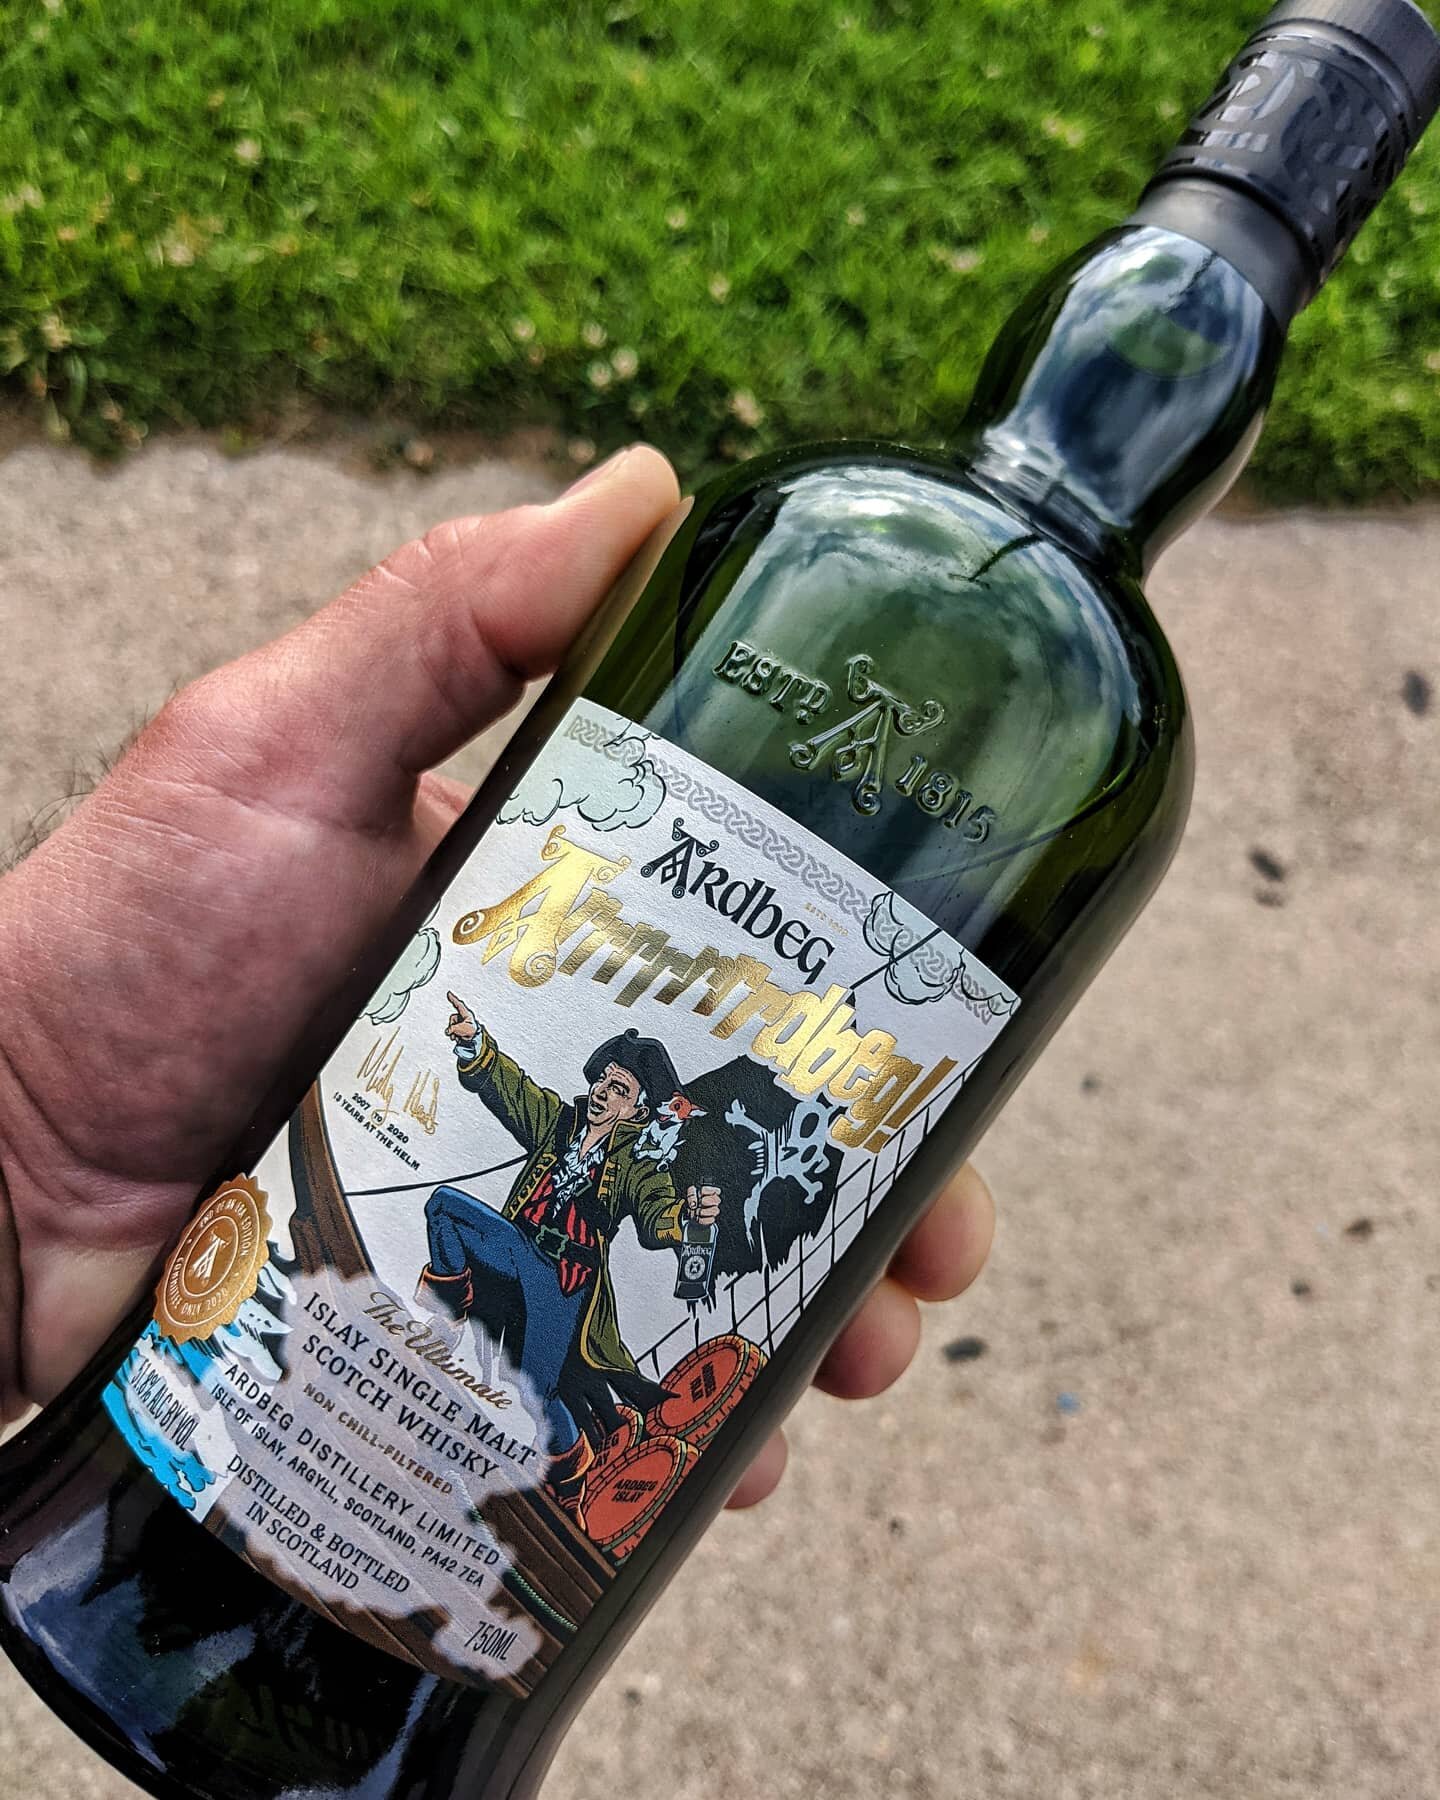 Been looking for this one for a little bit now, and it's totally fitting that I found it at the beach. 

#limitededition #ardbeg #ardbegcommittee 
#arrrrrrrdbeg #scotch #scotchwhisky #scotchyscotchscotch #whiskey